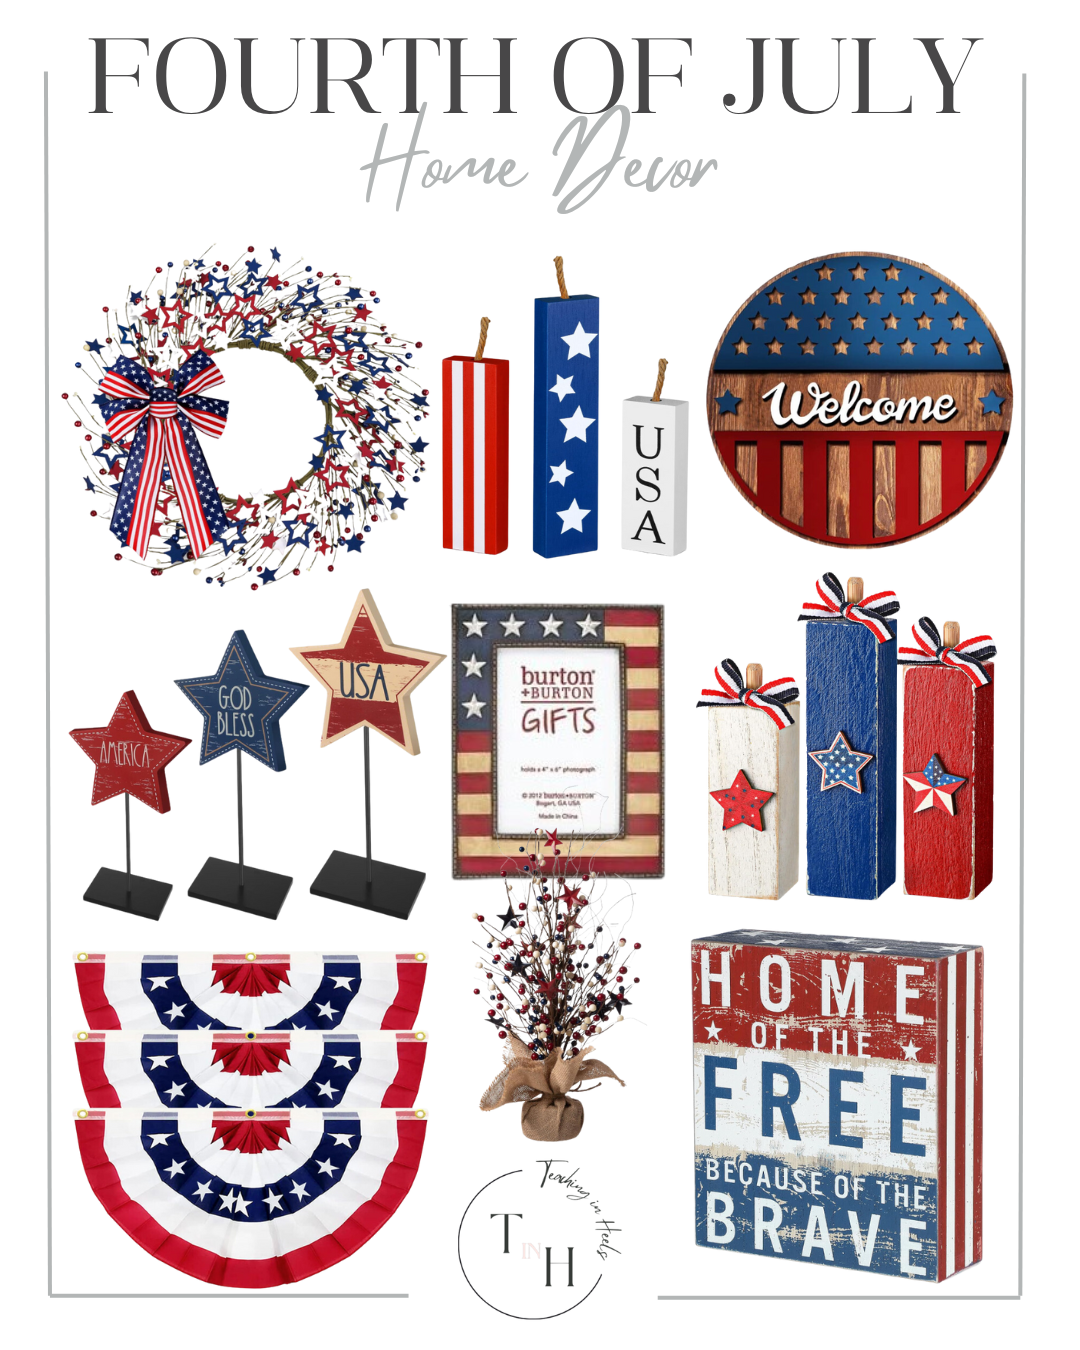 4th of July Style Guide: Must-Have Outfits & Essentials

fourth of july, summer, summer outfit, summer fashion, outdoor hosting, home, home decor, seasonal home decor, patriotic home